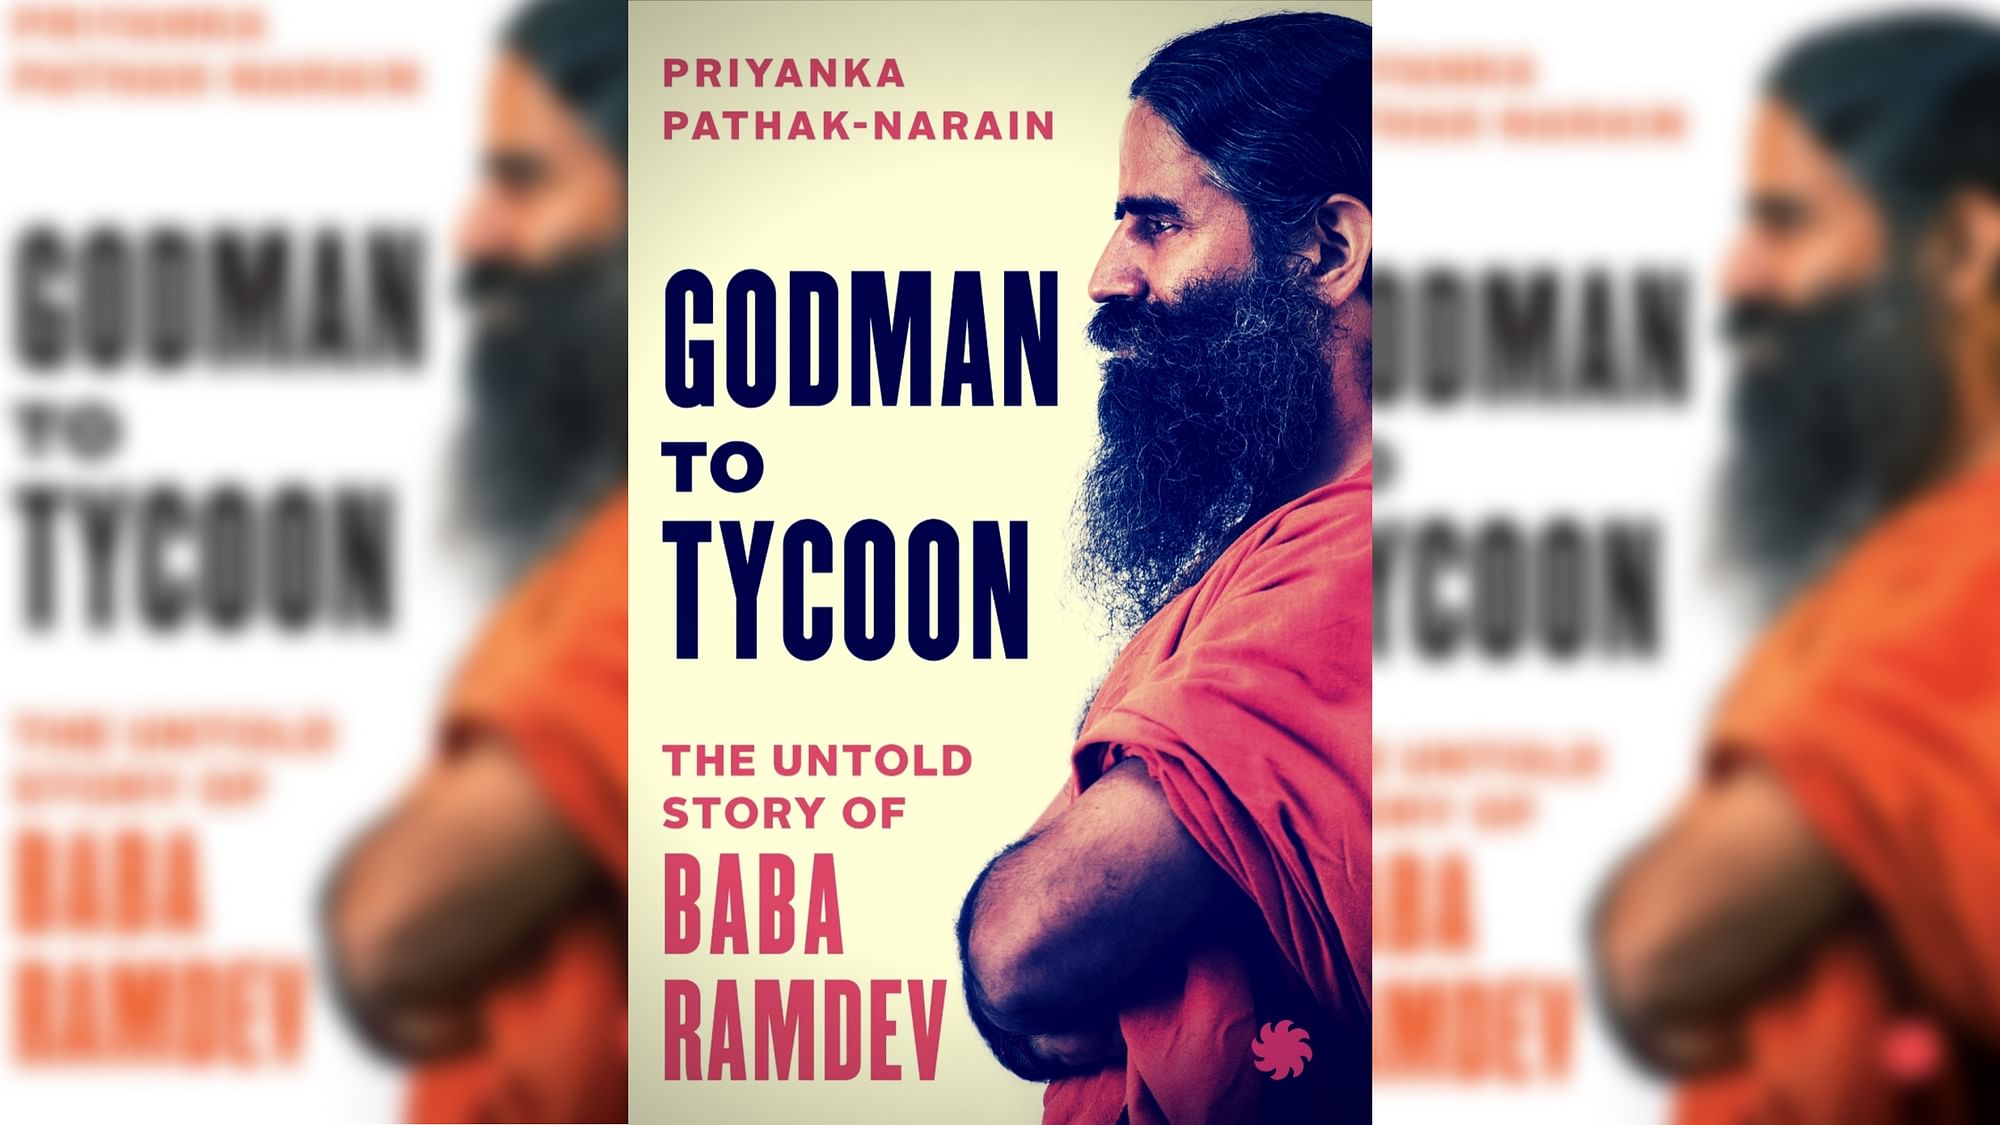 Narain has recently penned a biography on self-styled godman and now business tycoon Baba Ramdev – beloved of innumerable Indians across the world.